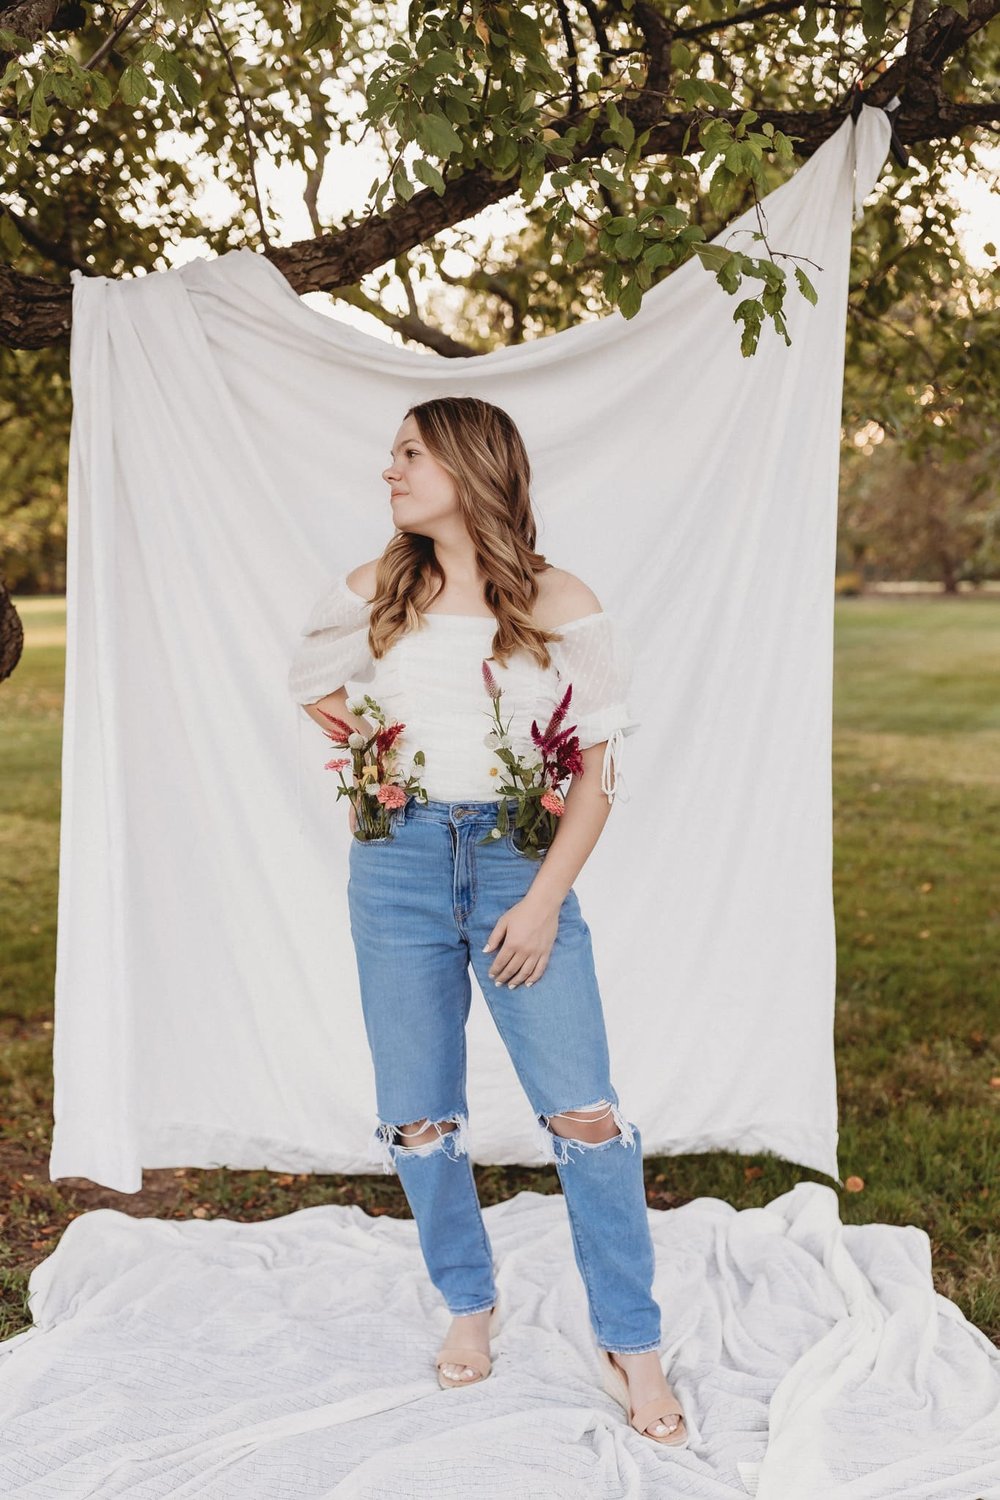  a girl stands in front of a sheet hanging from a tree with flowers in her pockets 